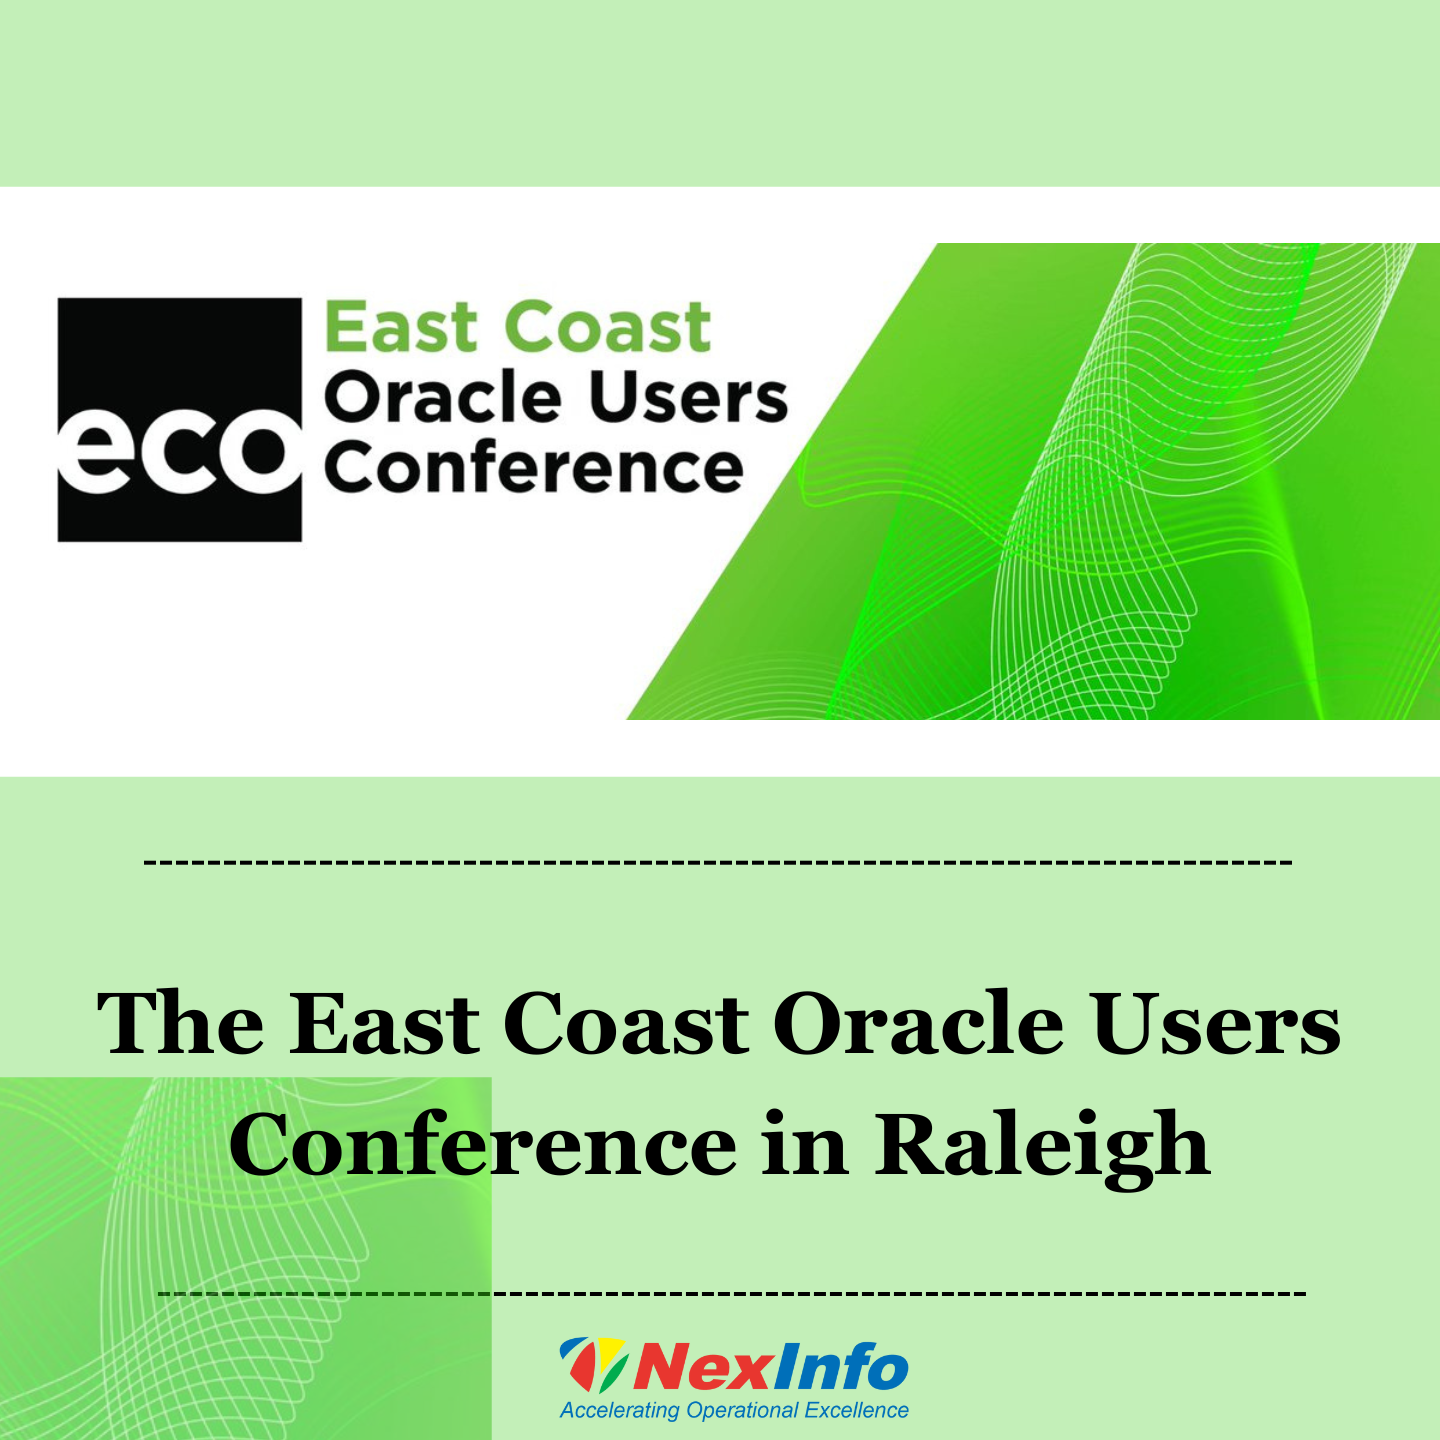 East Coast Oracle Users Conference